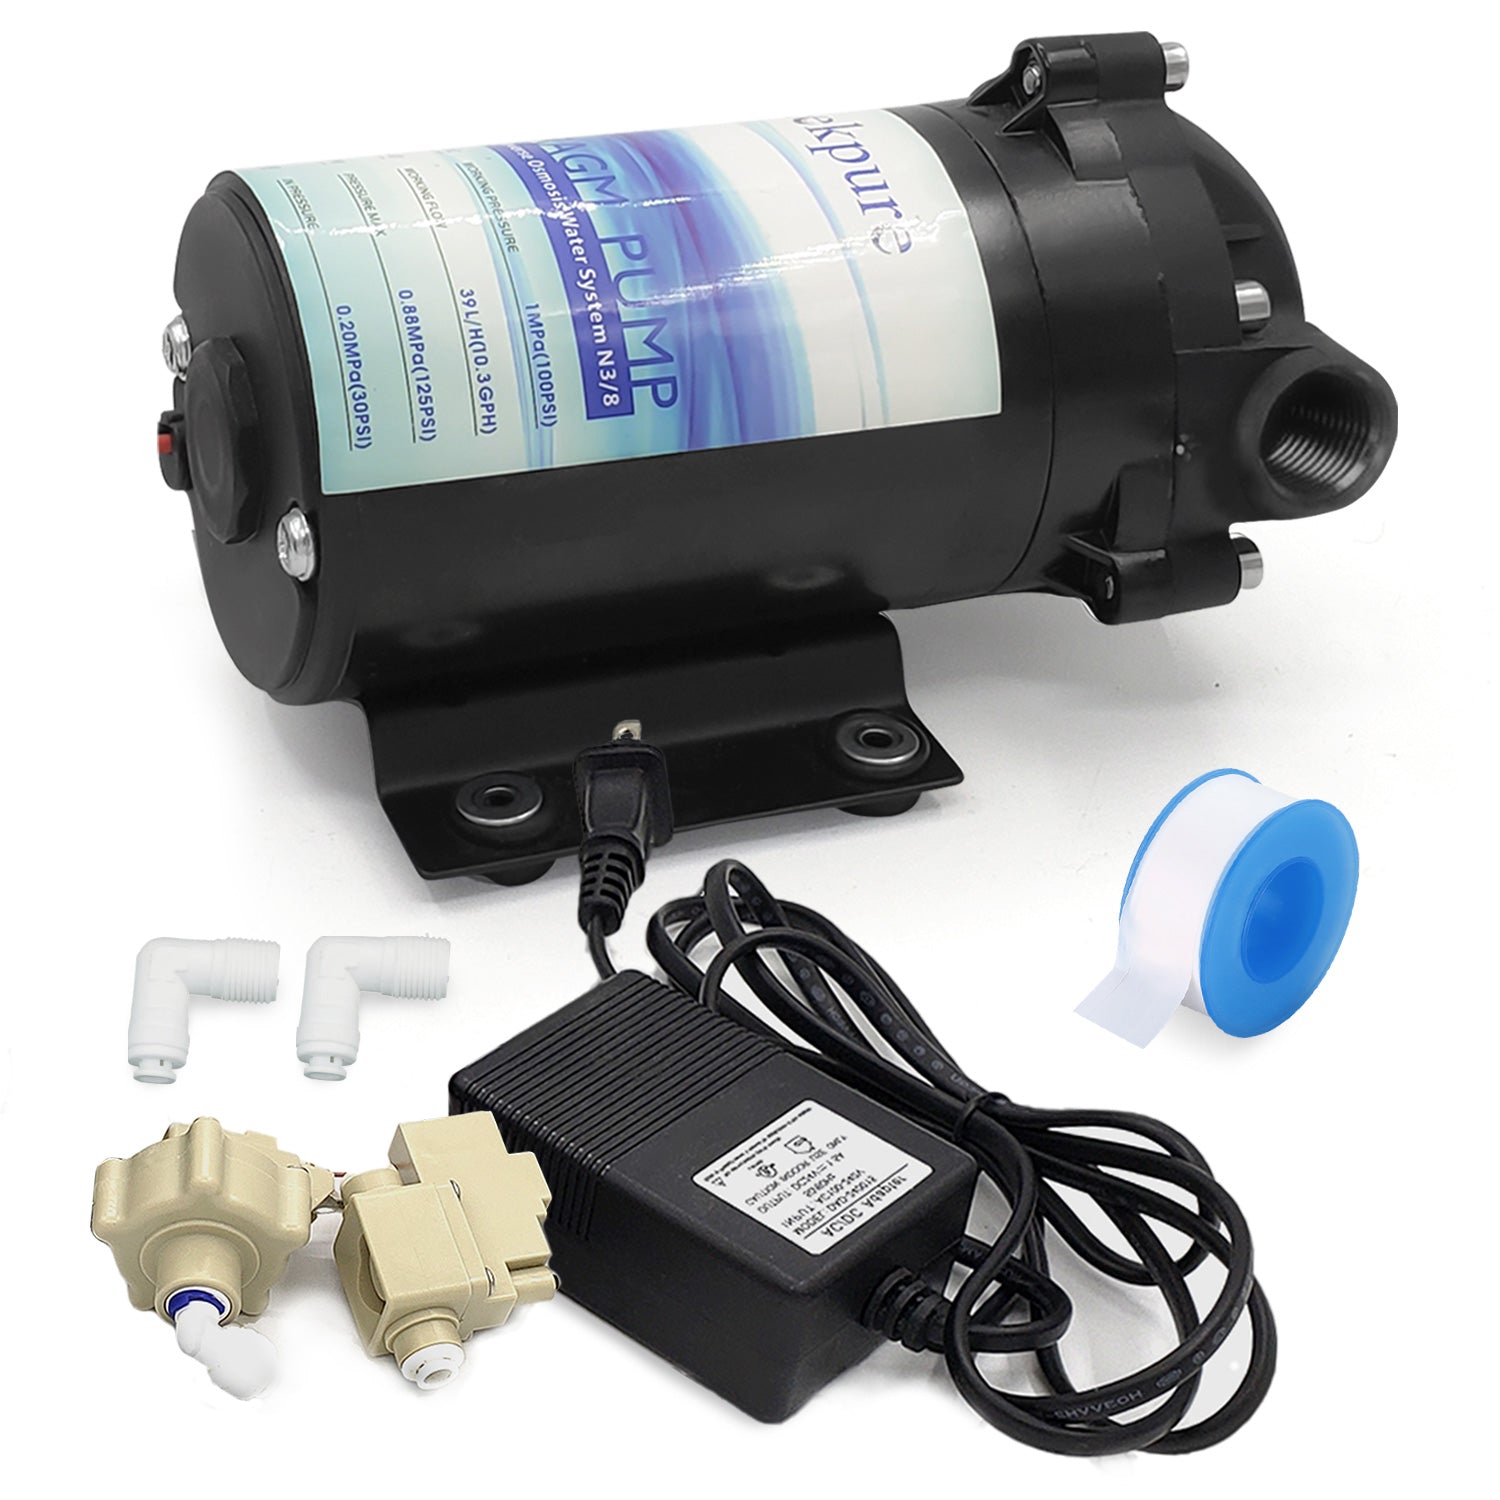 Booster Pump + Transformer + High & Low Pressure Switch + Fittings Kit –  Geekpure Water Group